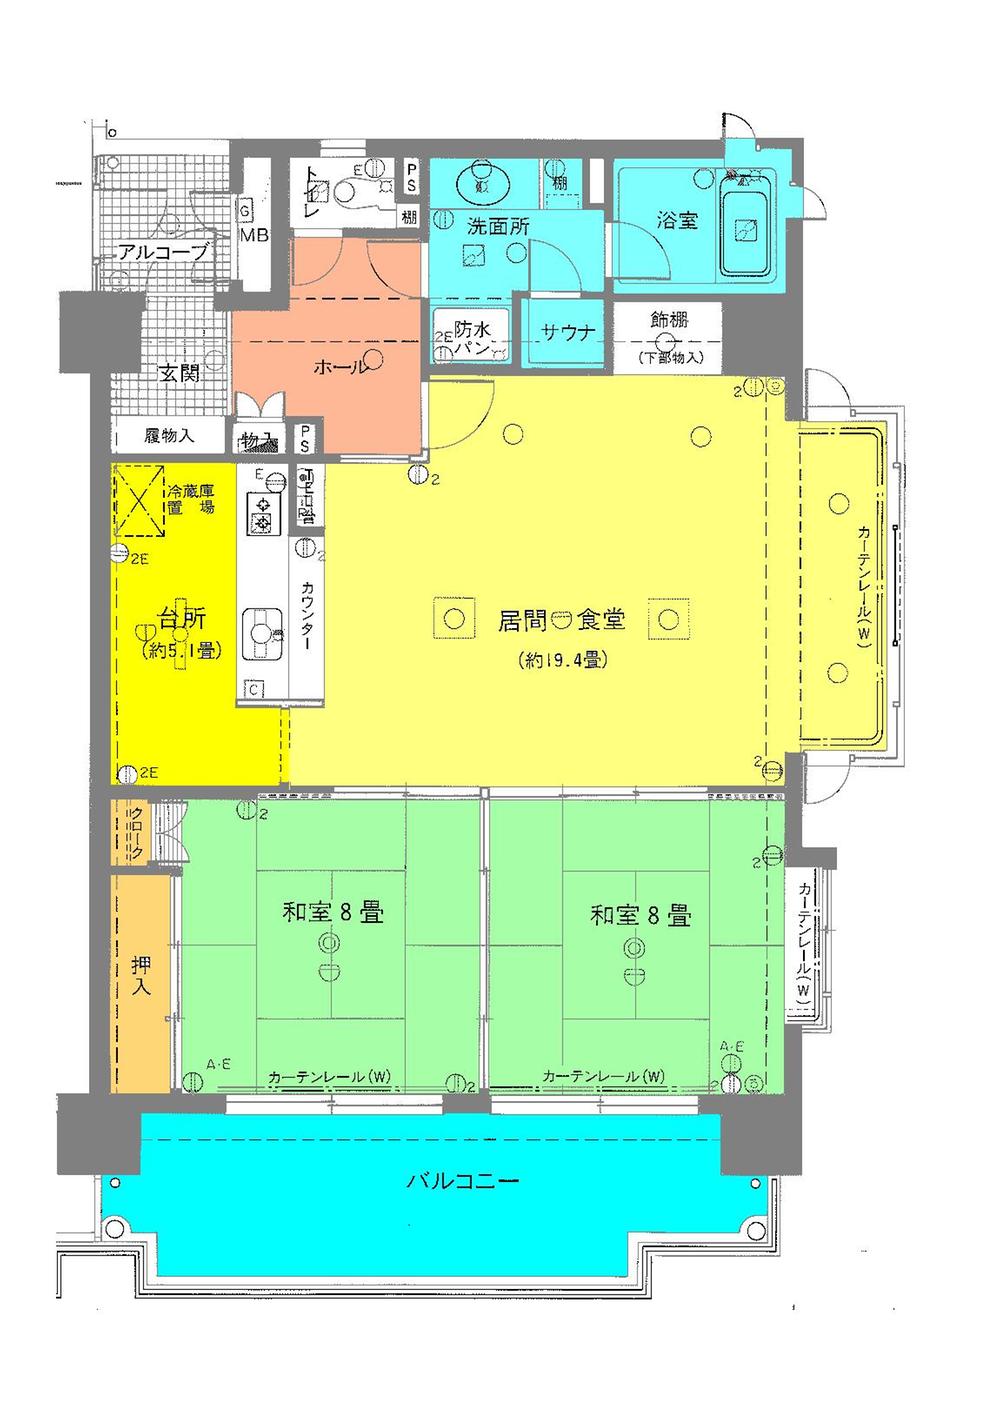 Floor plan. 2LDK, Price 11.8 million yen, Occupied area 91.83 sq m , Is the second corner room from the balcony area 16.66 on sq m